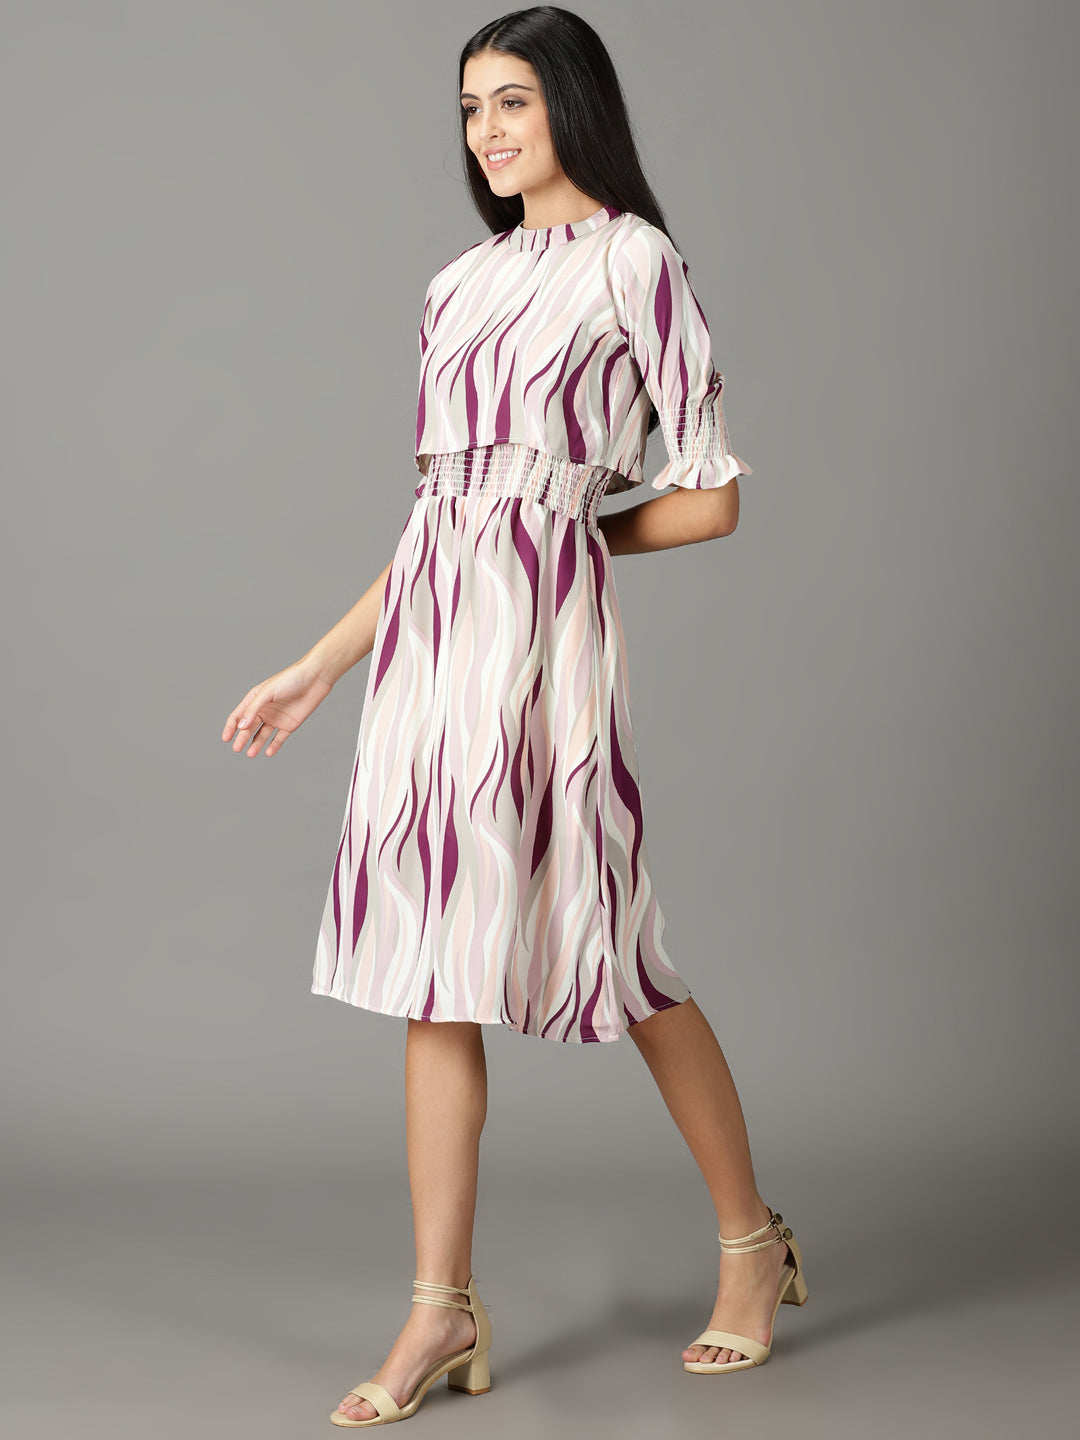 Women's Off White Printed Fit and Flare Dress